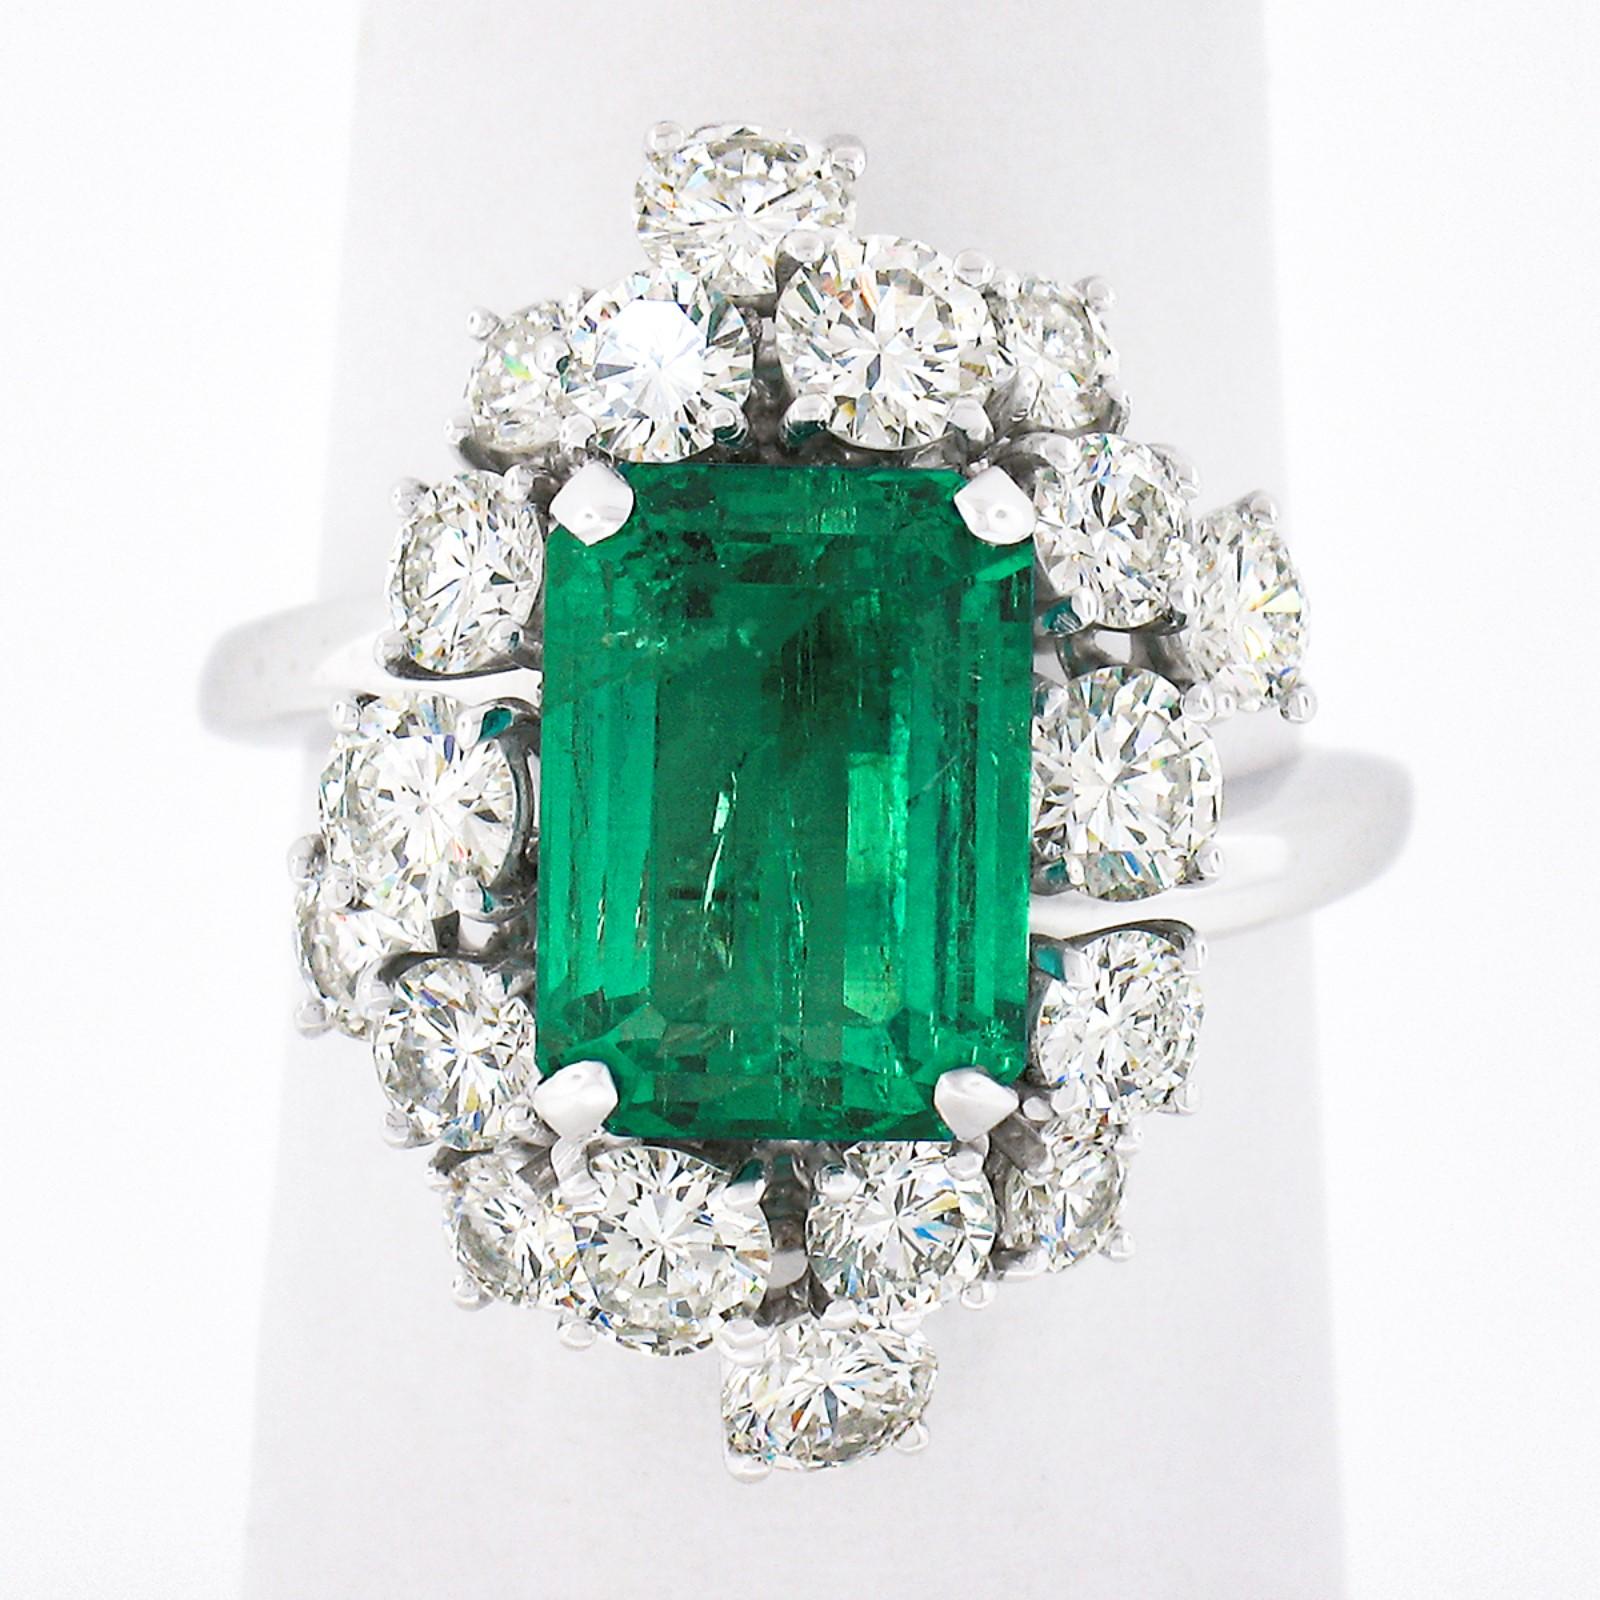 Here we have a truly jaw dropping vintage emerald and diamond cocktail ring, crafted in solid platinum. The ring features a gorgeous, GIA certified, natural emerald stone that displays the most attractive and rich green color with amazing amount of